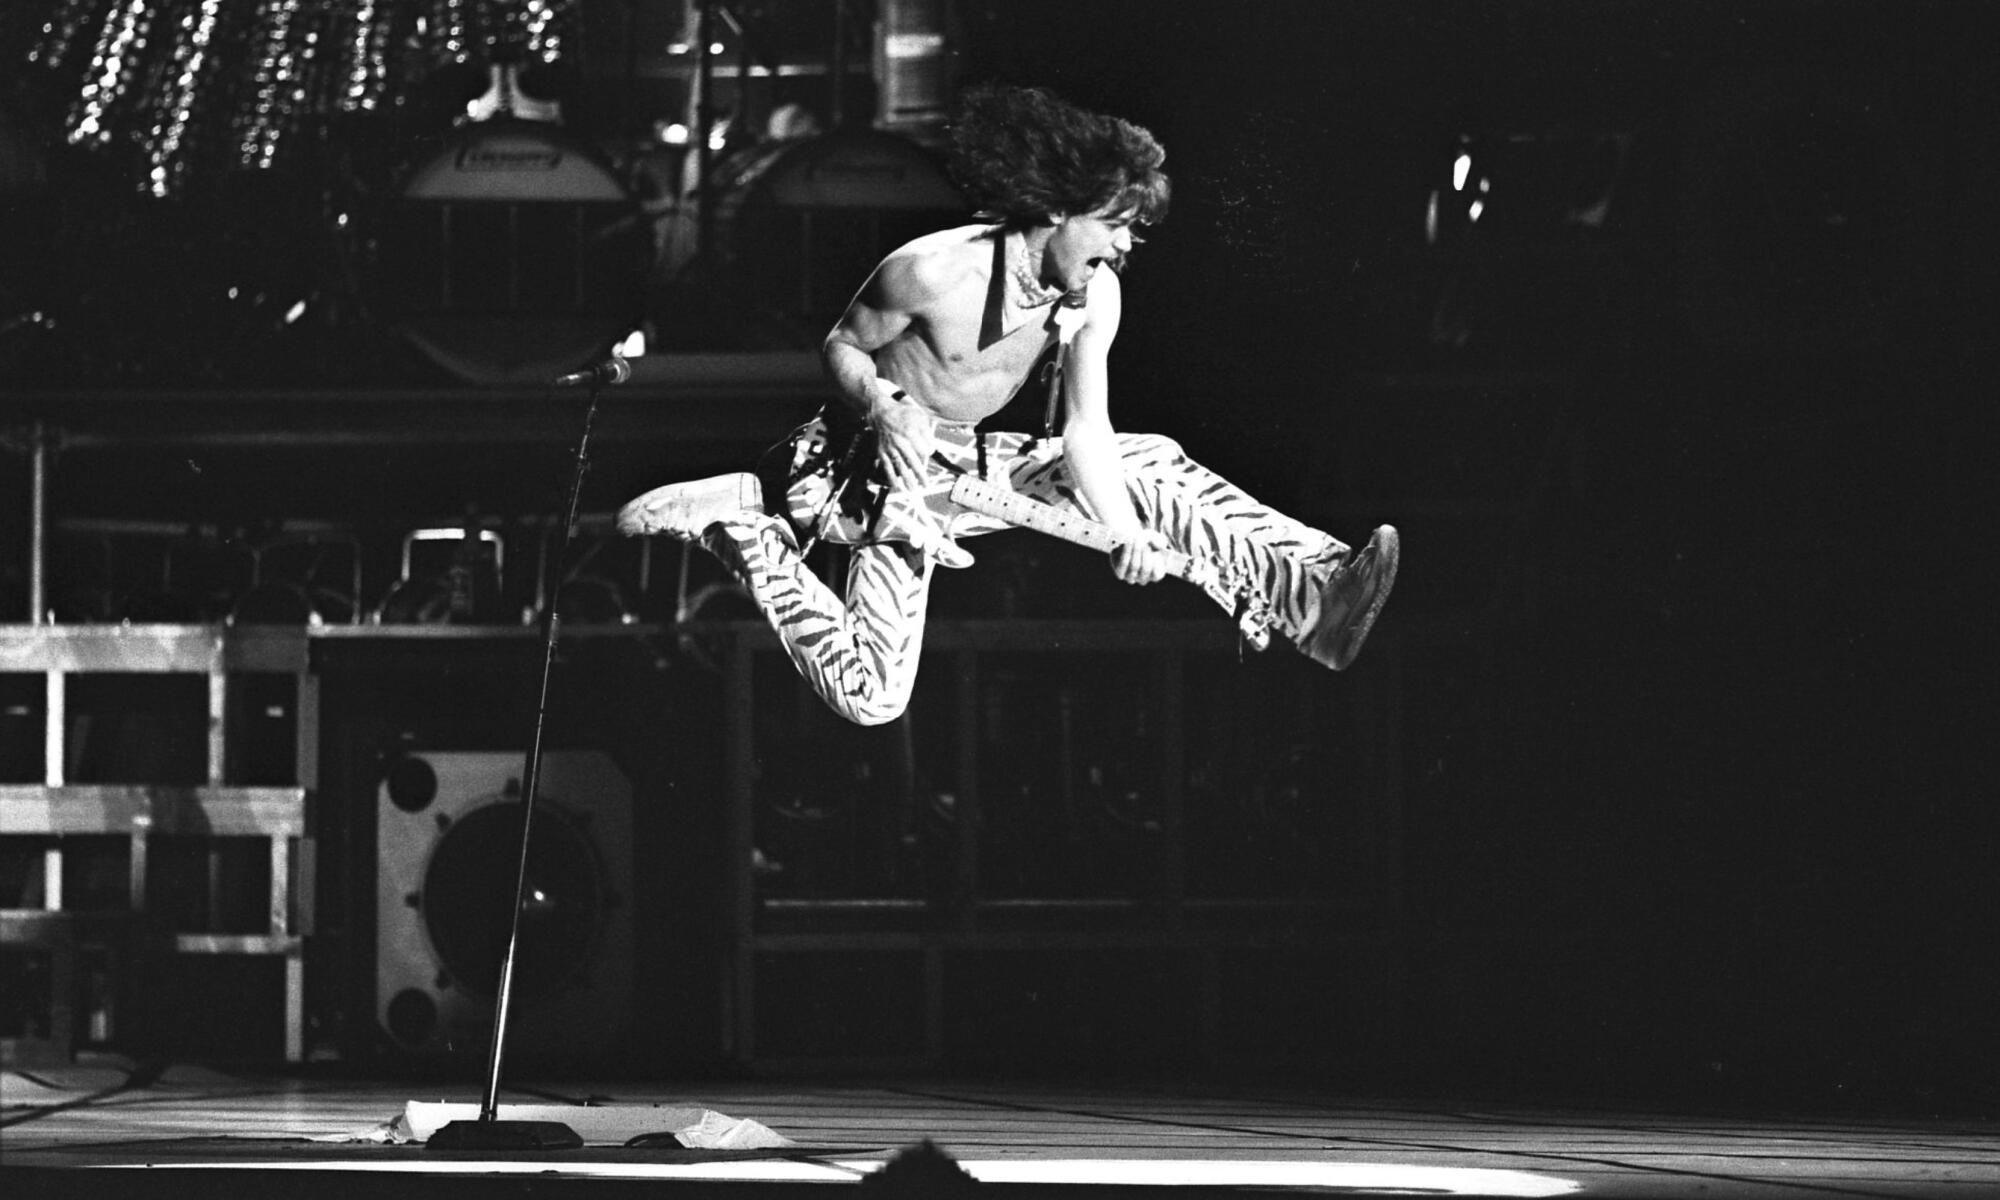 Eddie Van Halen, shirtless and with a bandanna around his neck, leaps in the air as he plays his guitar.